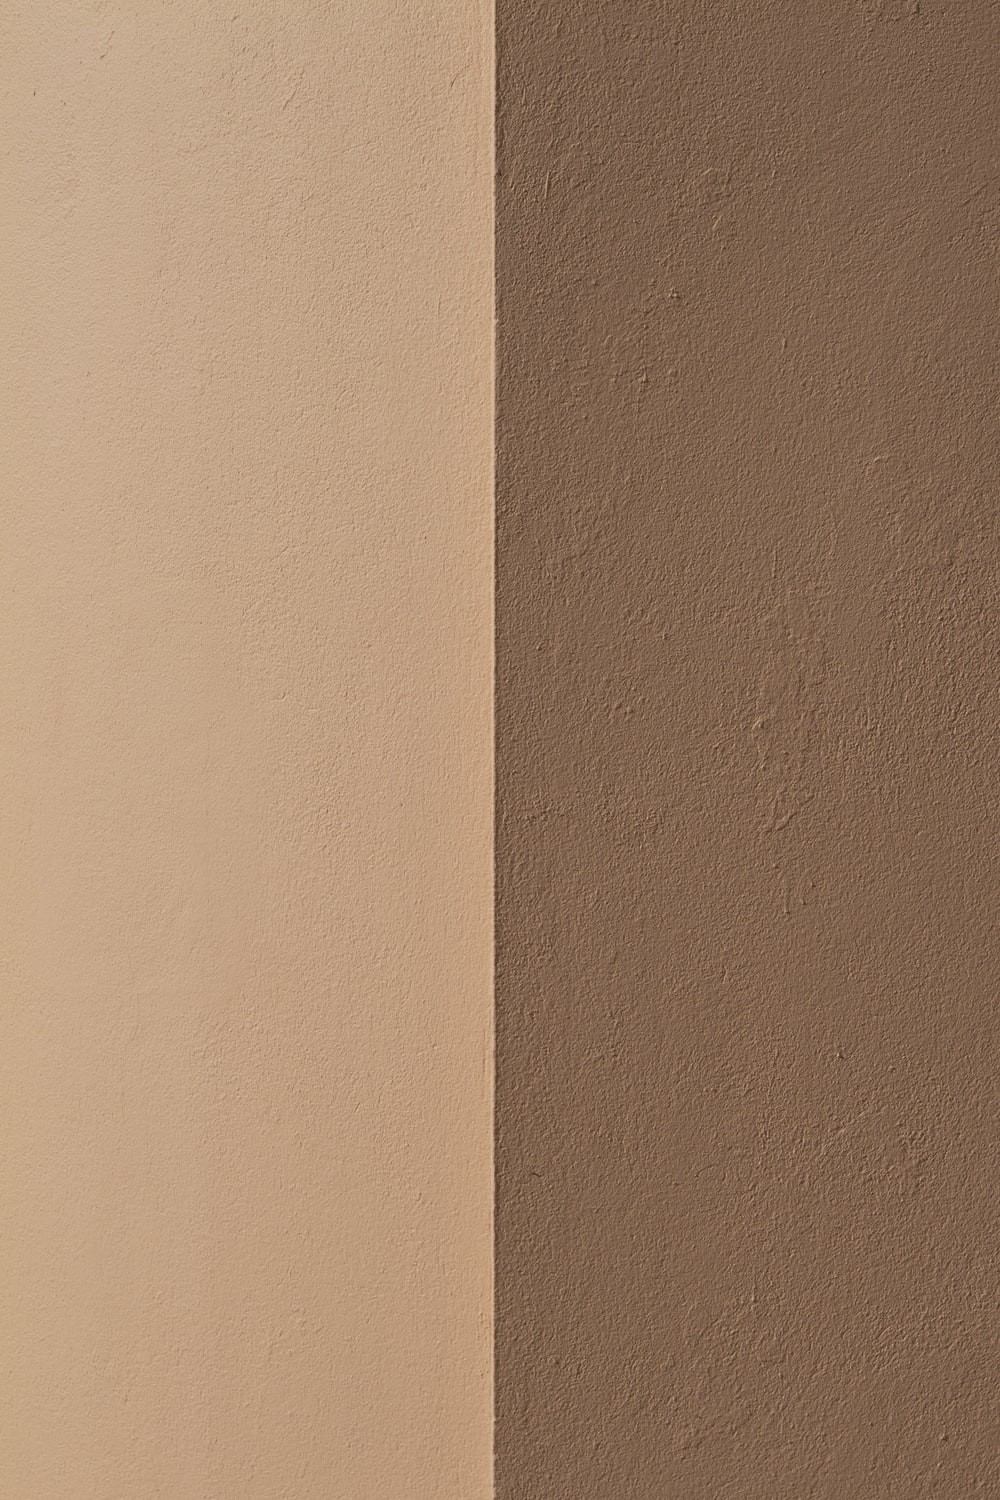 Brown Texture Picture. Download Free Image